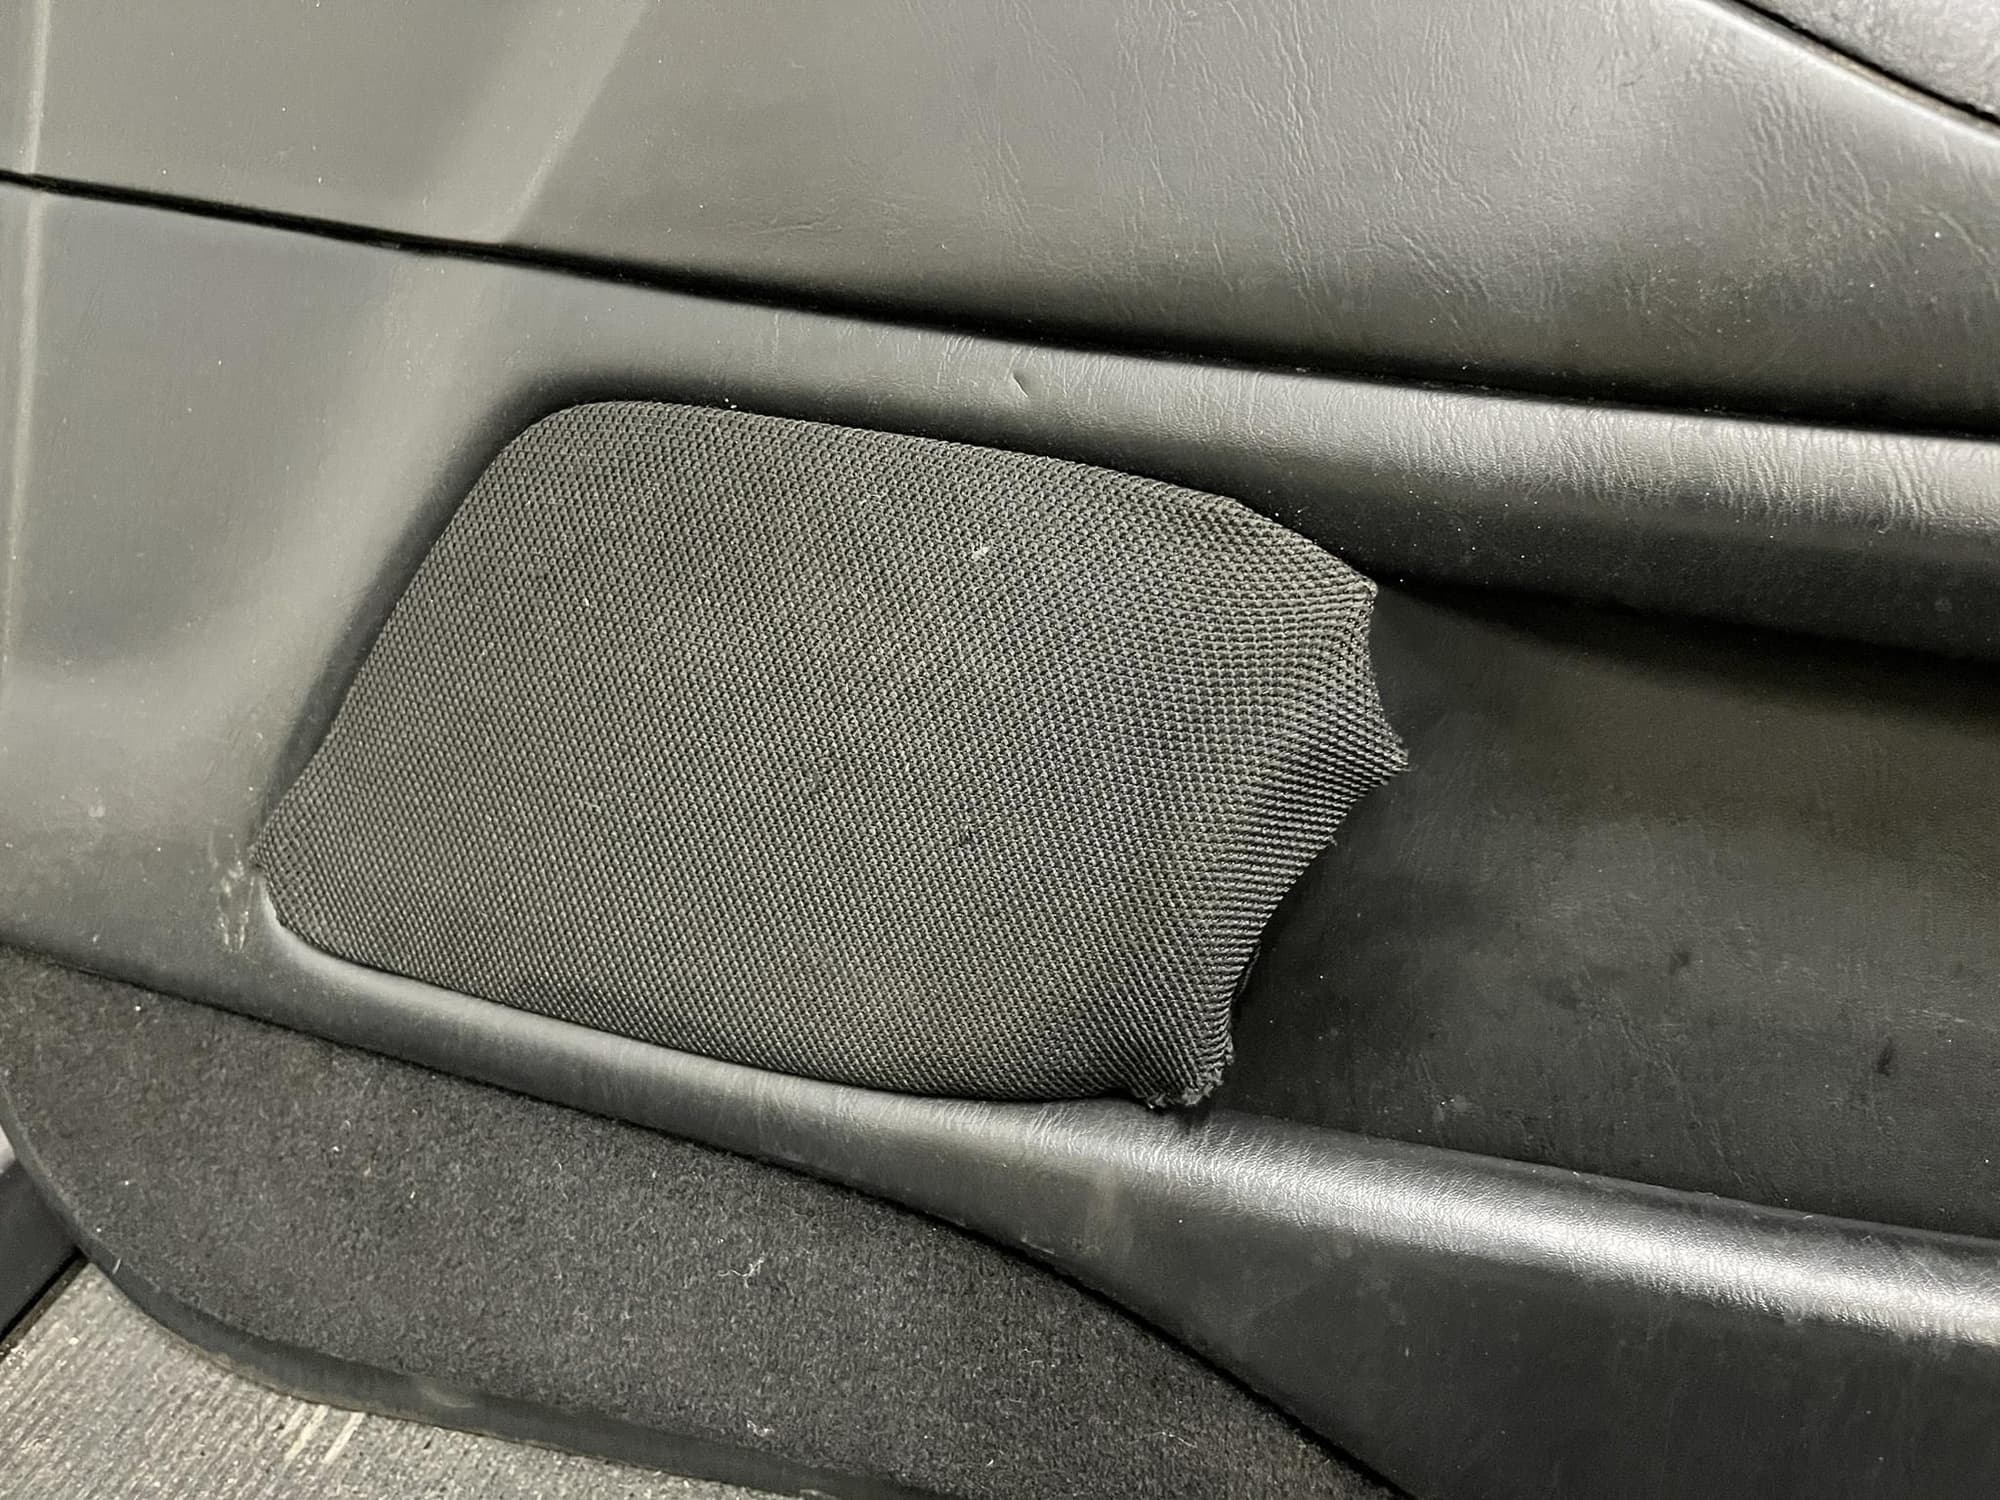 Interior/Upholstery - Black door panels and airbag - Used - 1998 to 2005 Lexus GS - Wake Forest, NC 27587, United States